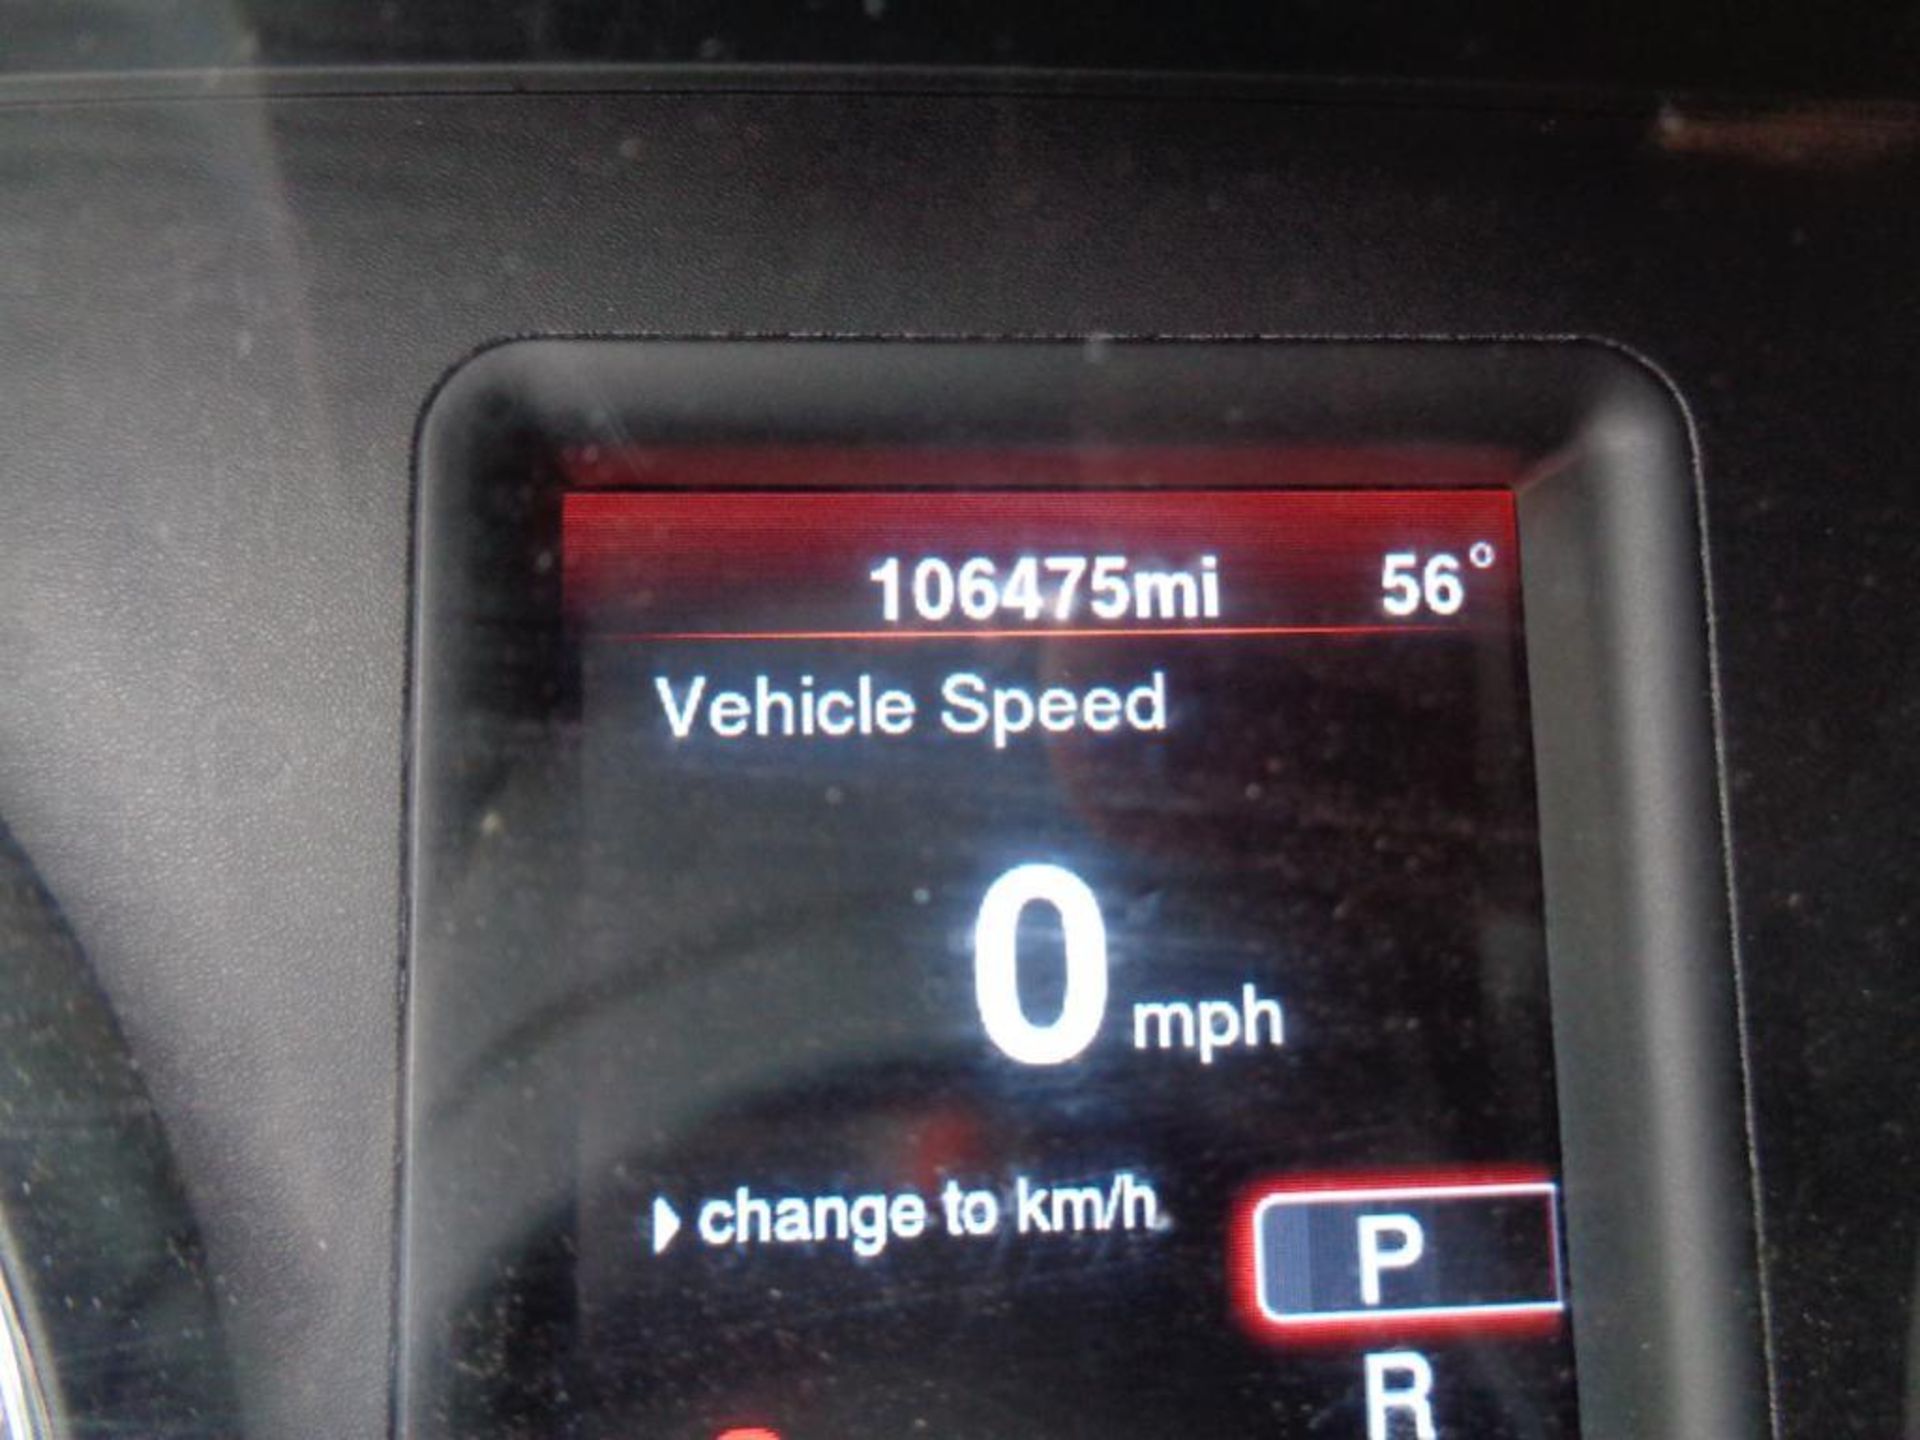 2013 Dodge Charger Car s/n 2c3cdxat4dh629396,v8 eng, auto trans, odometer reads 106475 miles - Image 7 of 7